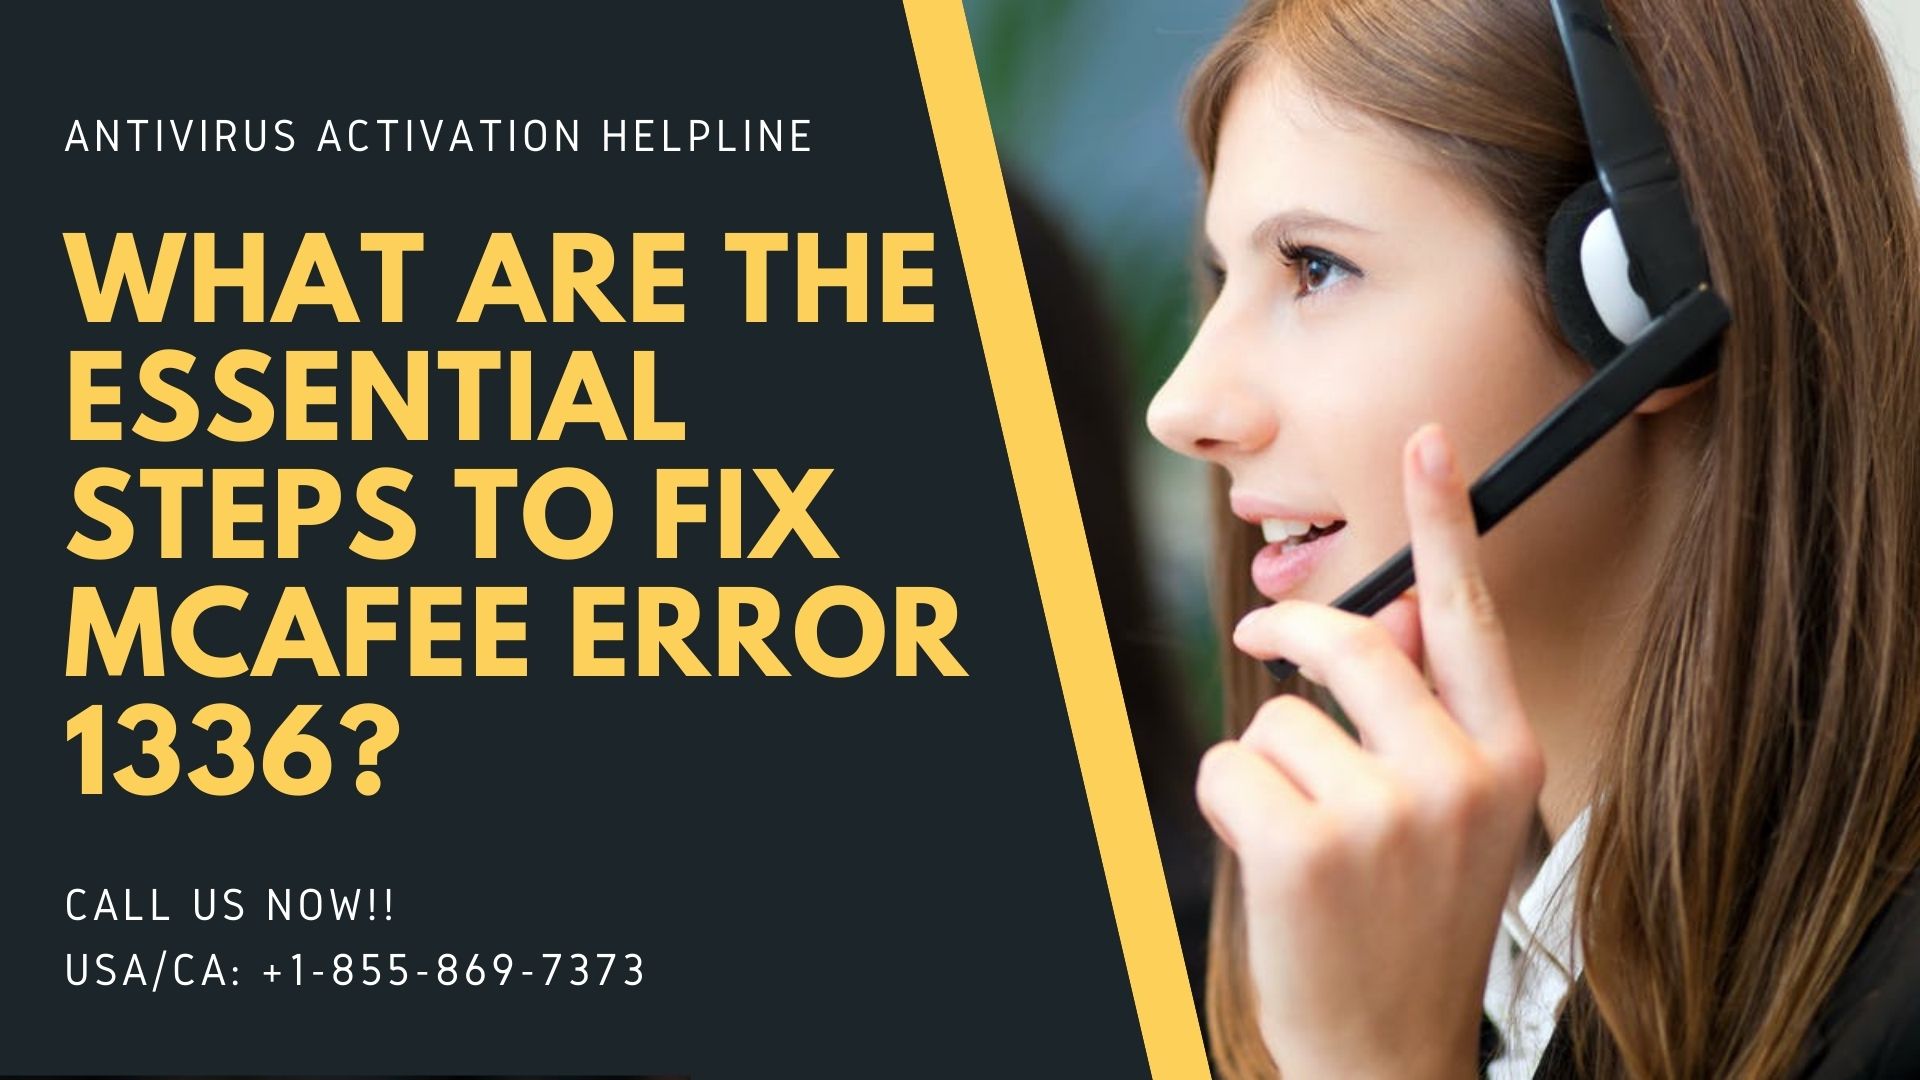 What Are the Essential Steps to Fix McAfee Error 1336?